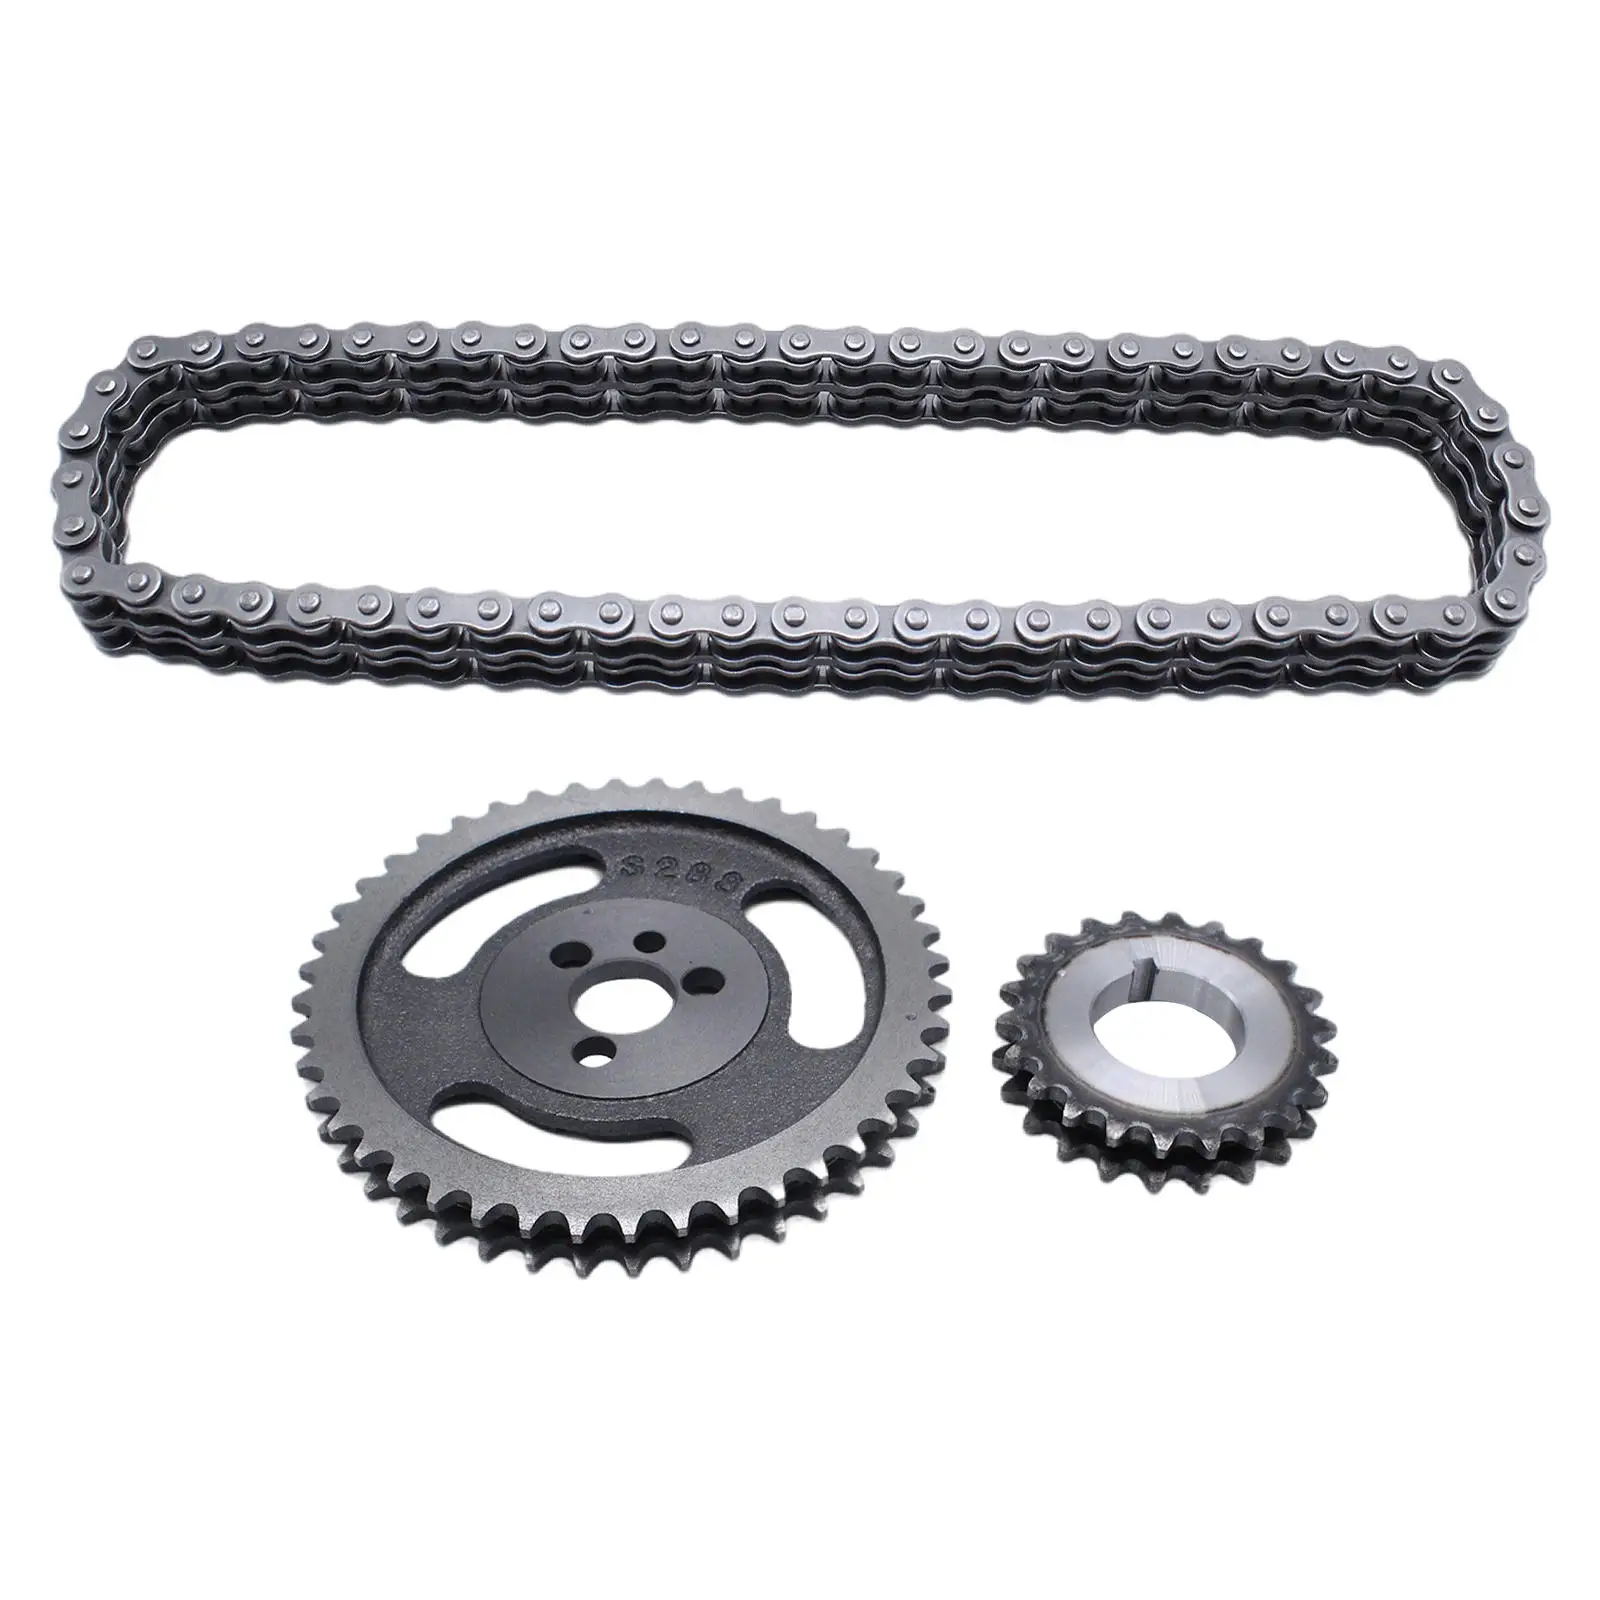 Double Roller Timing Chain Set TS163 Clo-C-3023x Double Row Side Engine for Chevrolet GM Sbc 5.7L 400 383 327 283